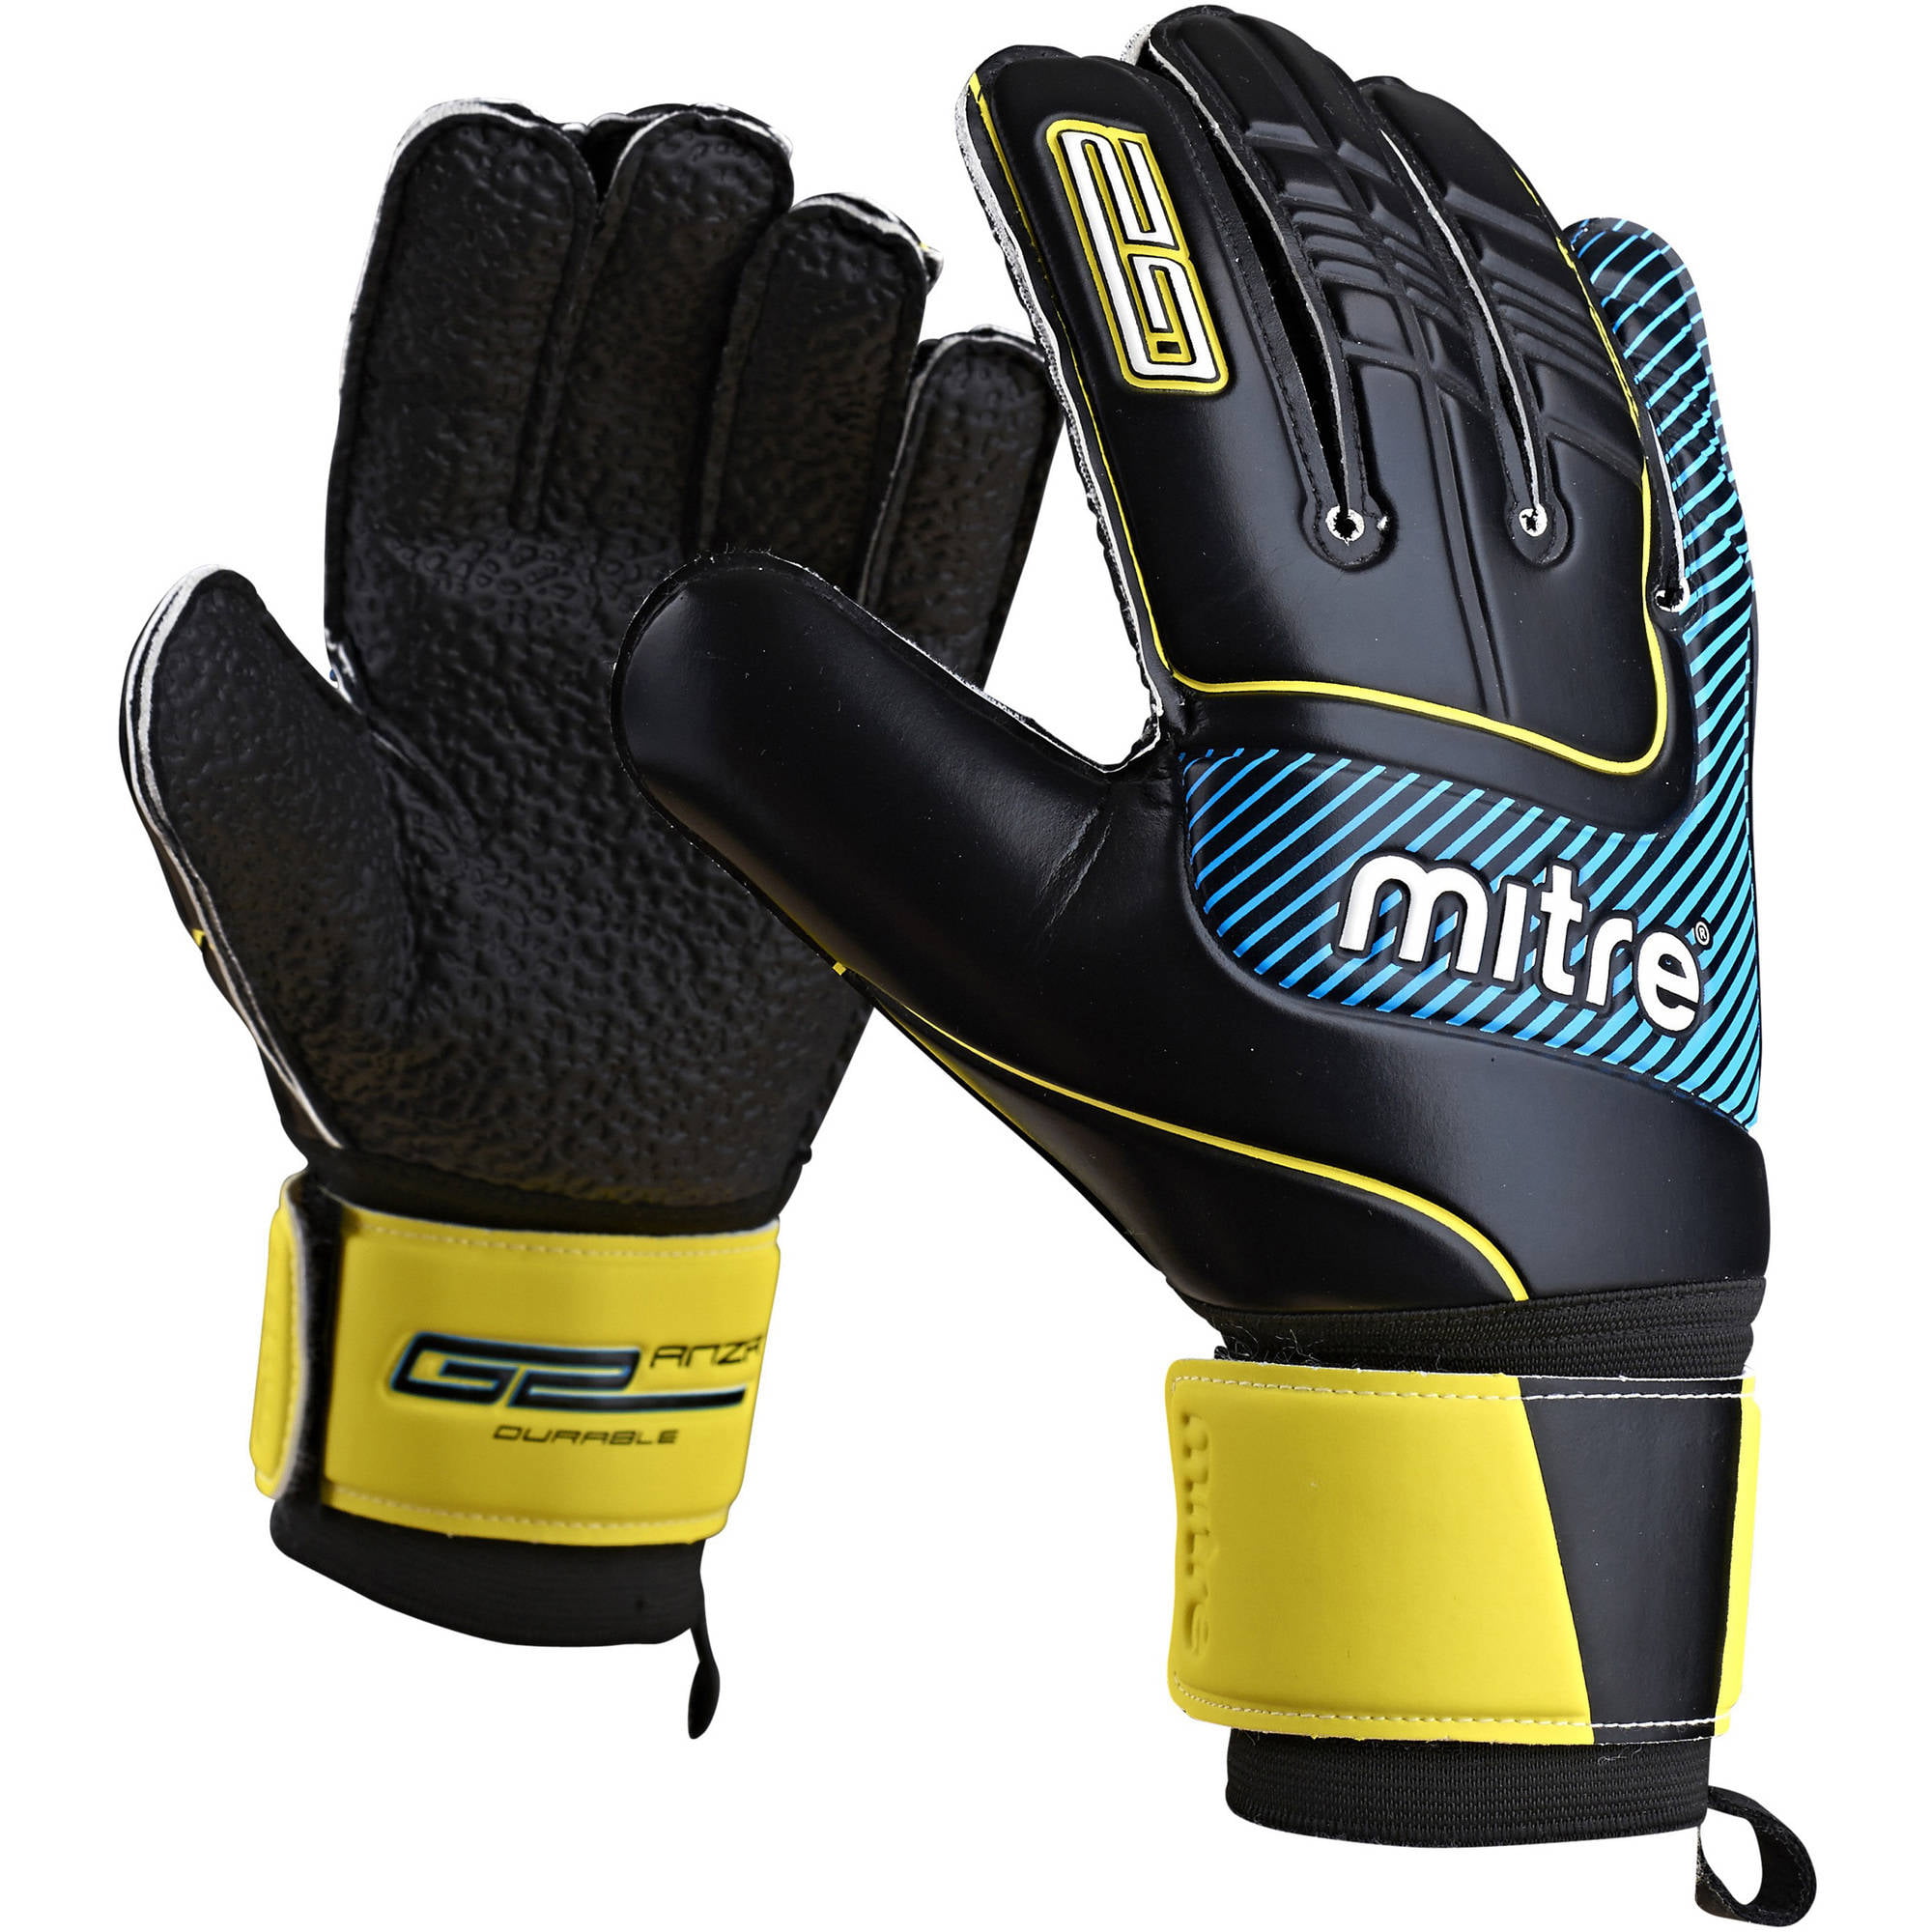 Mitre Goalkeeper Gloves Football size 9 New in packet. 